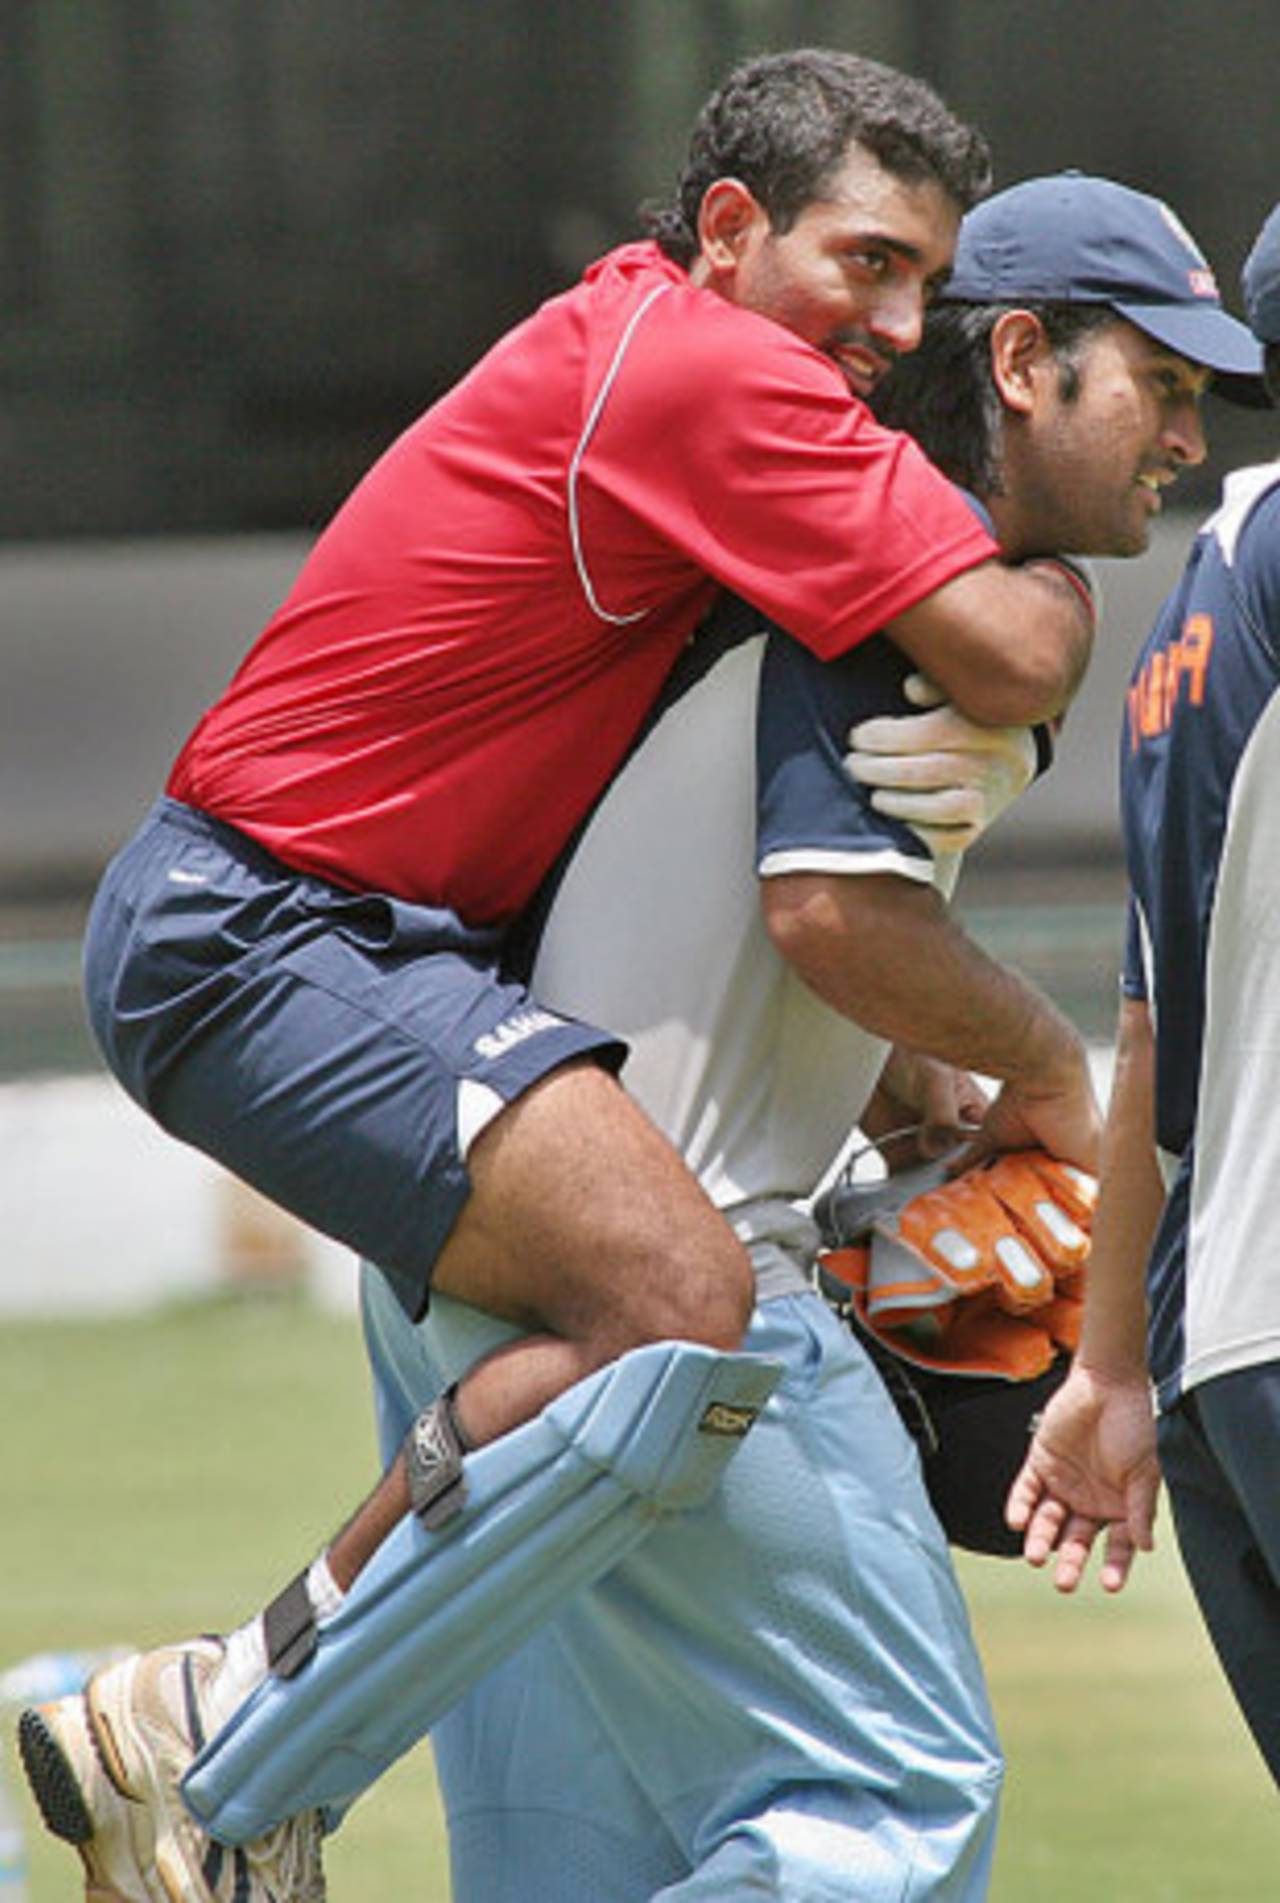 MS Dhoni carries Robin Uthappa on his back, Bangalore, June 14, 2007